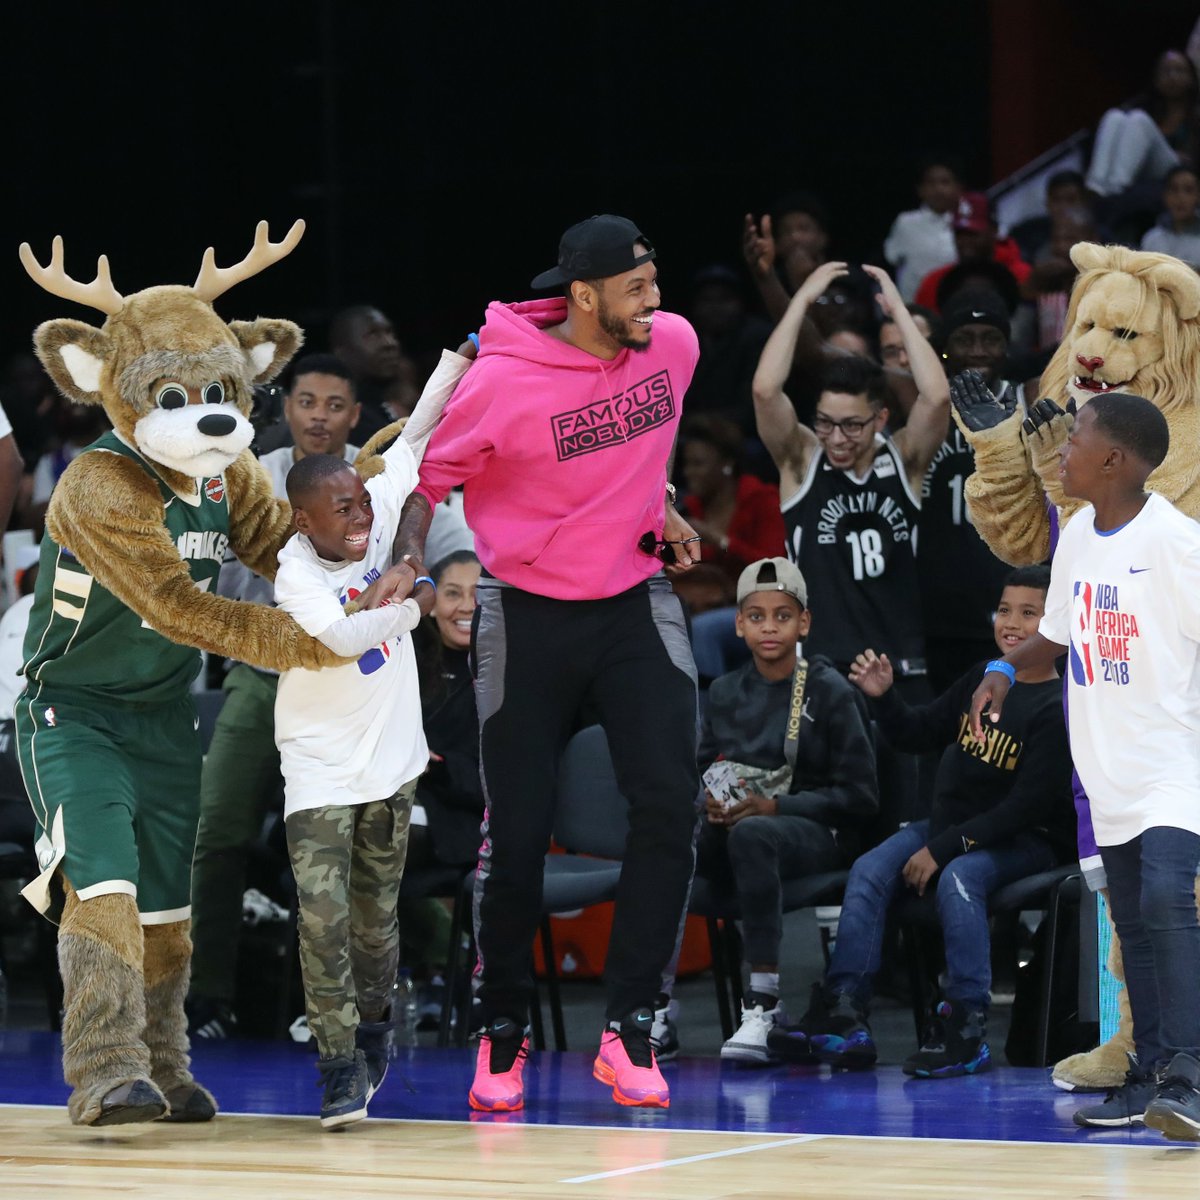 Complex Sneakers on Twitter: ".@CarmeloAnthony enjoying the #NBAAfricaGame in the "Racer Pink" Nike Air 97 Plus. https://t.co/ED5oCIXnWF" /